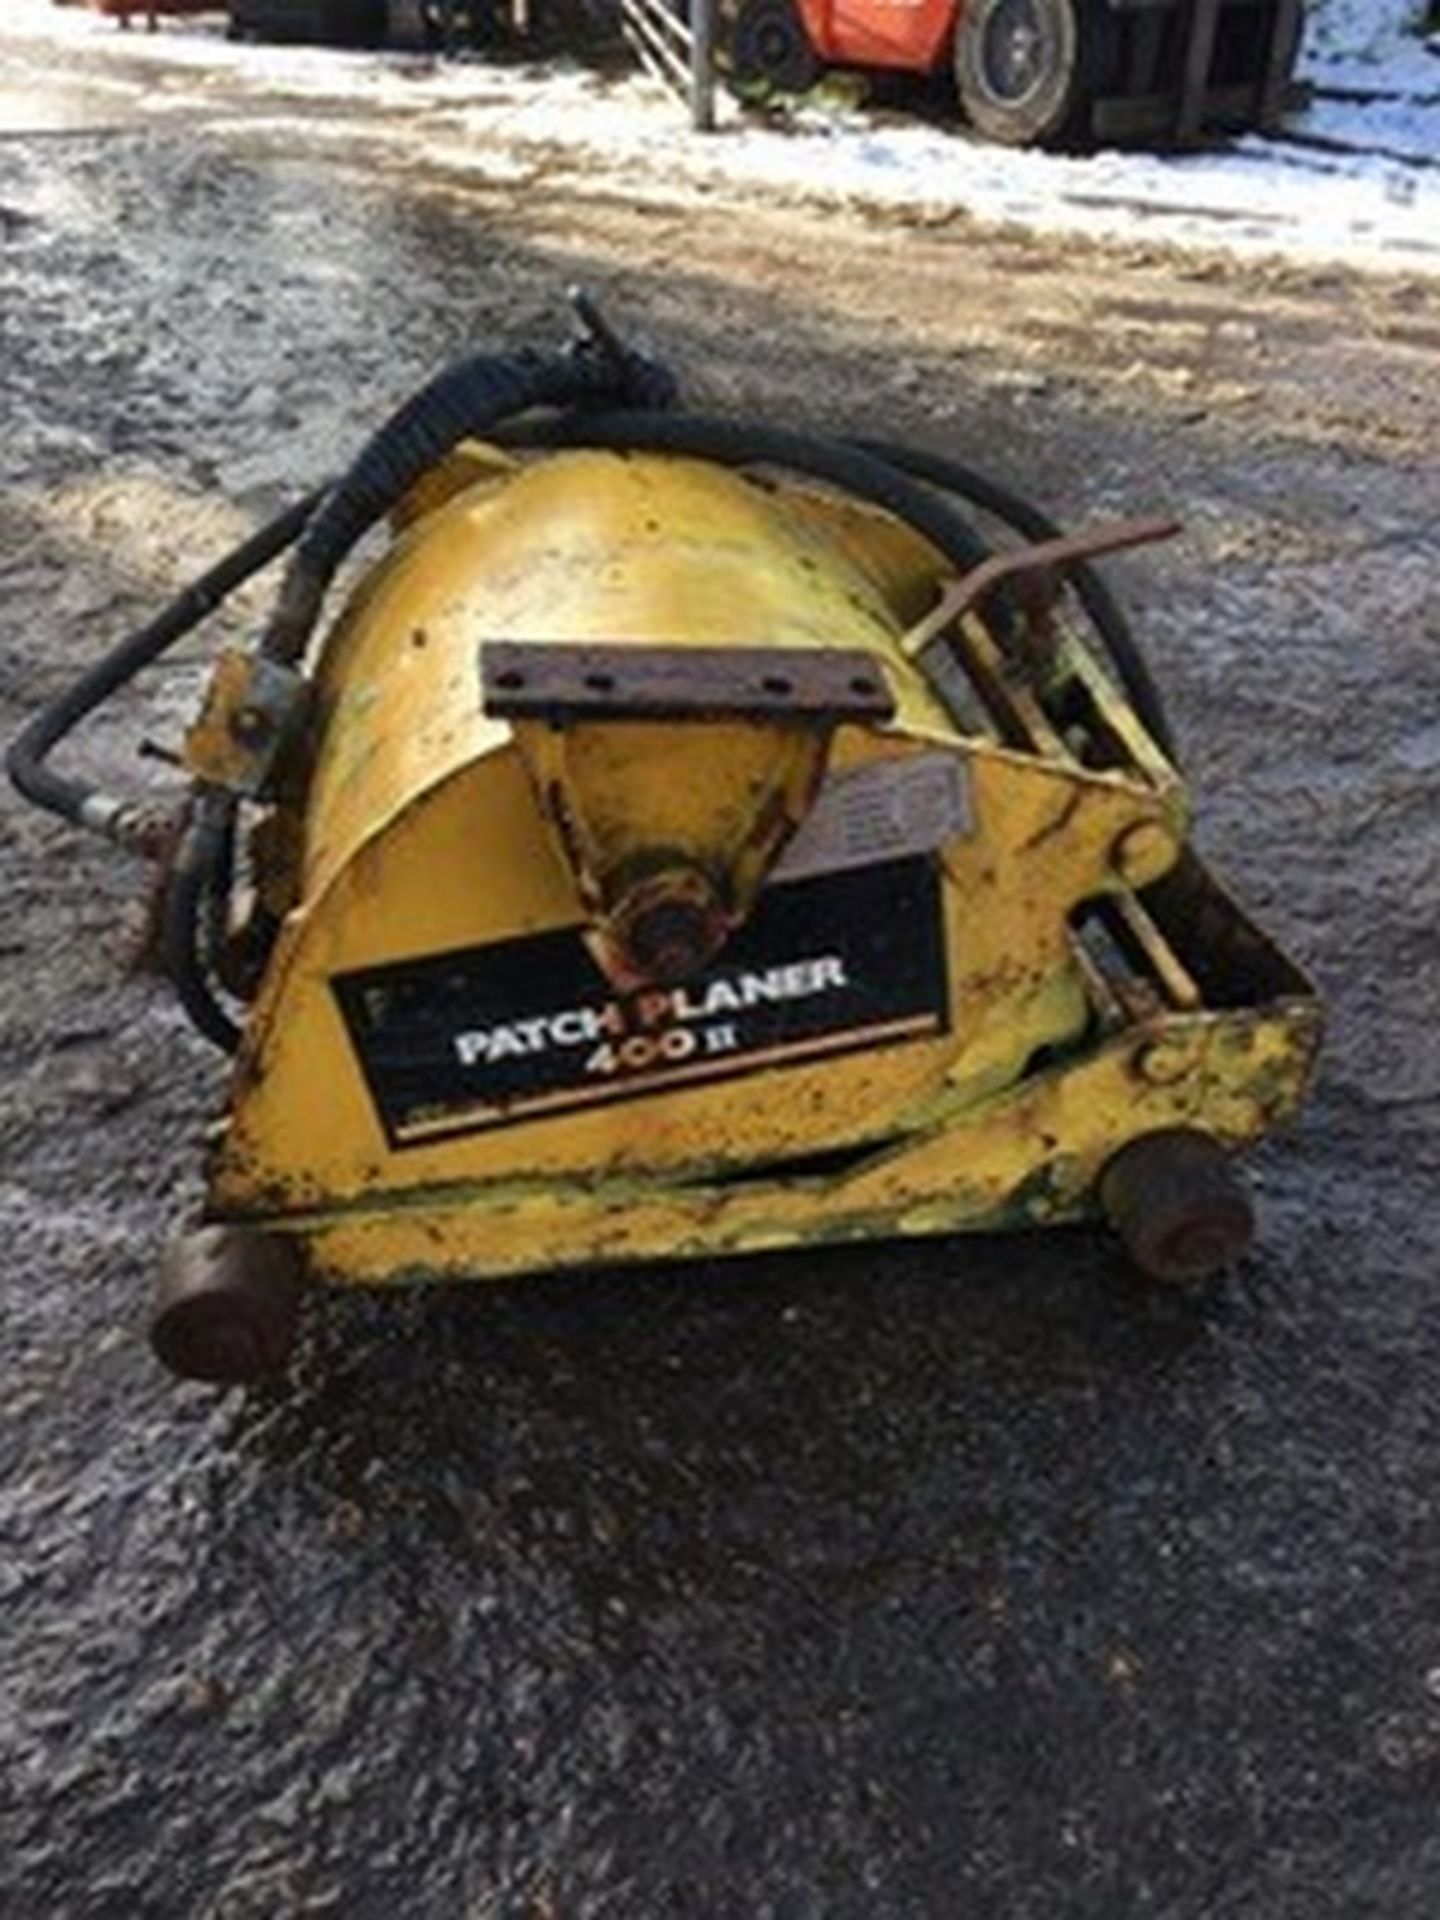 JCB patch planer 200 series S/N 10945. . **To be sold from Errol auction site. Viewing and uplift fr - Image 3 of 5